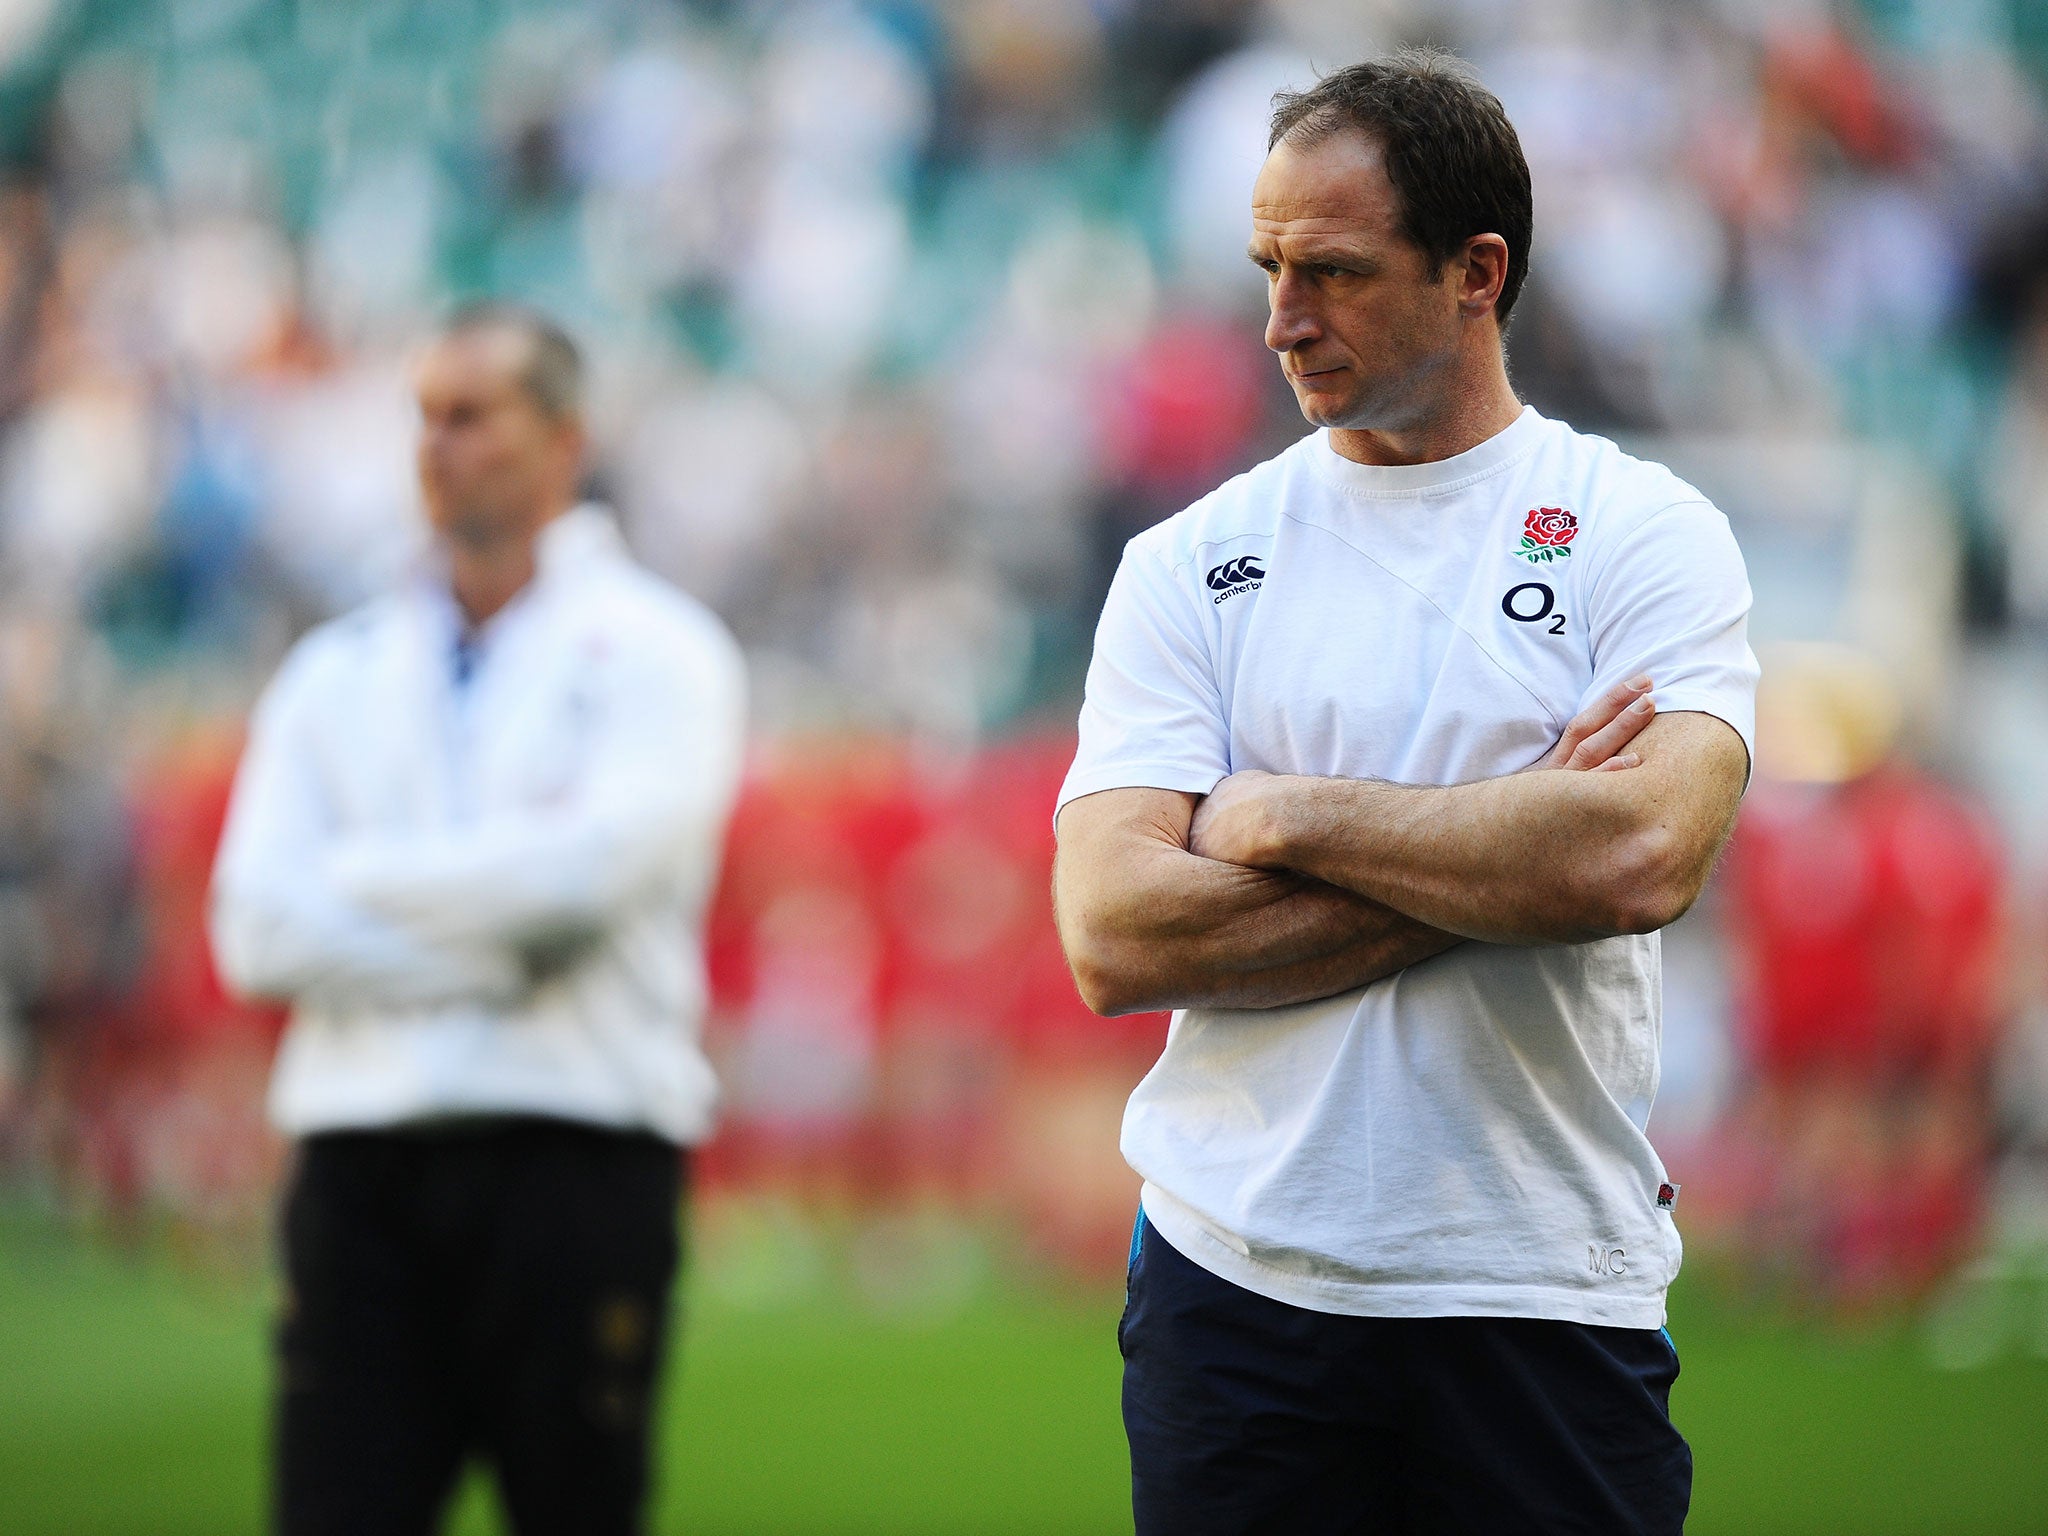 England attacking skills coach Mike Catt has admitted they have a selection dilemma ahead of the second Test against New Zealand